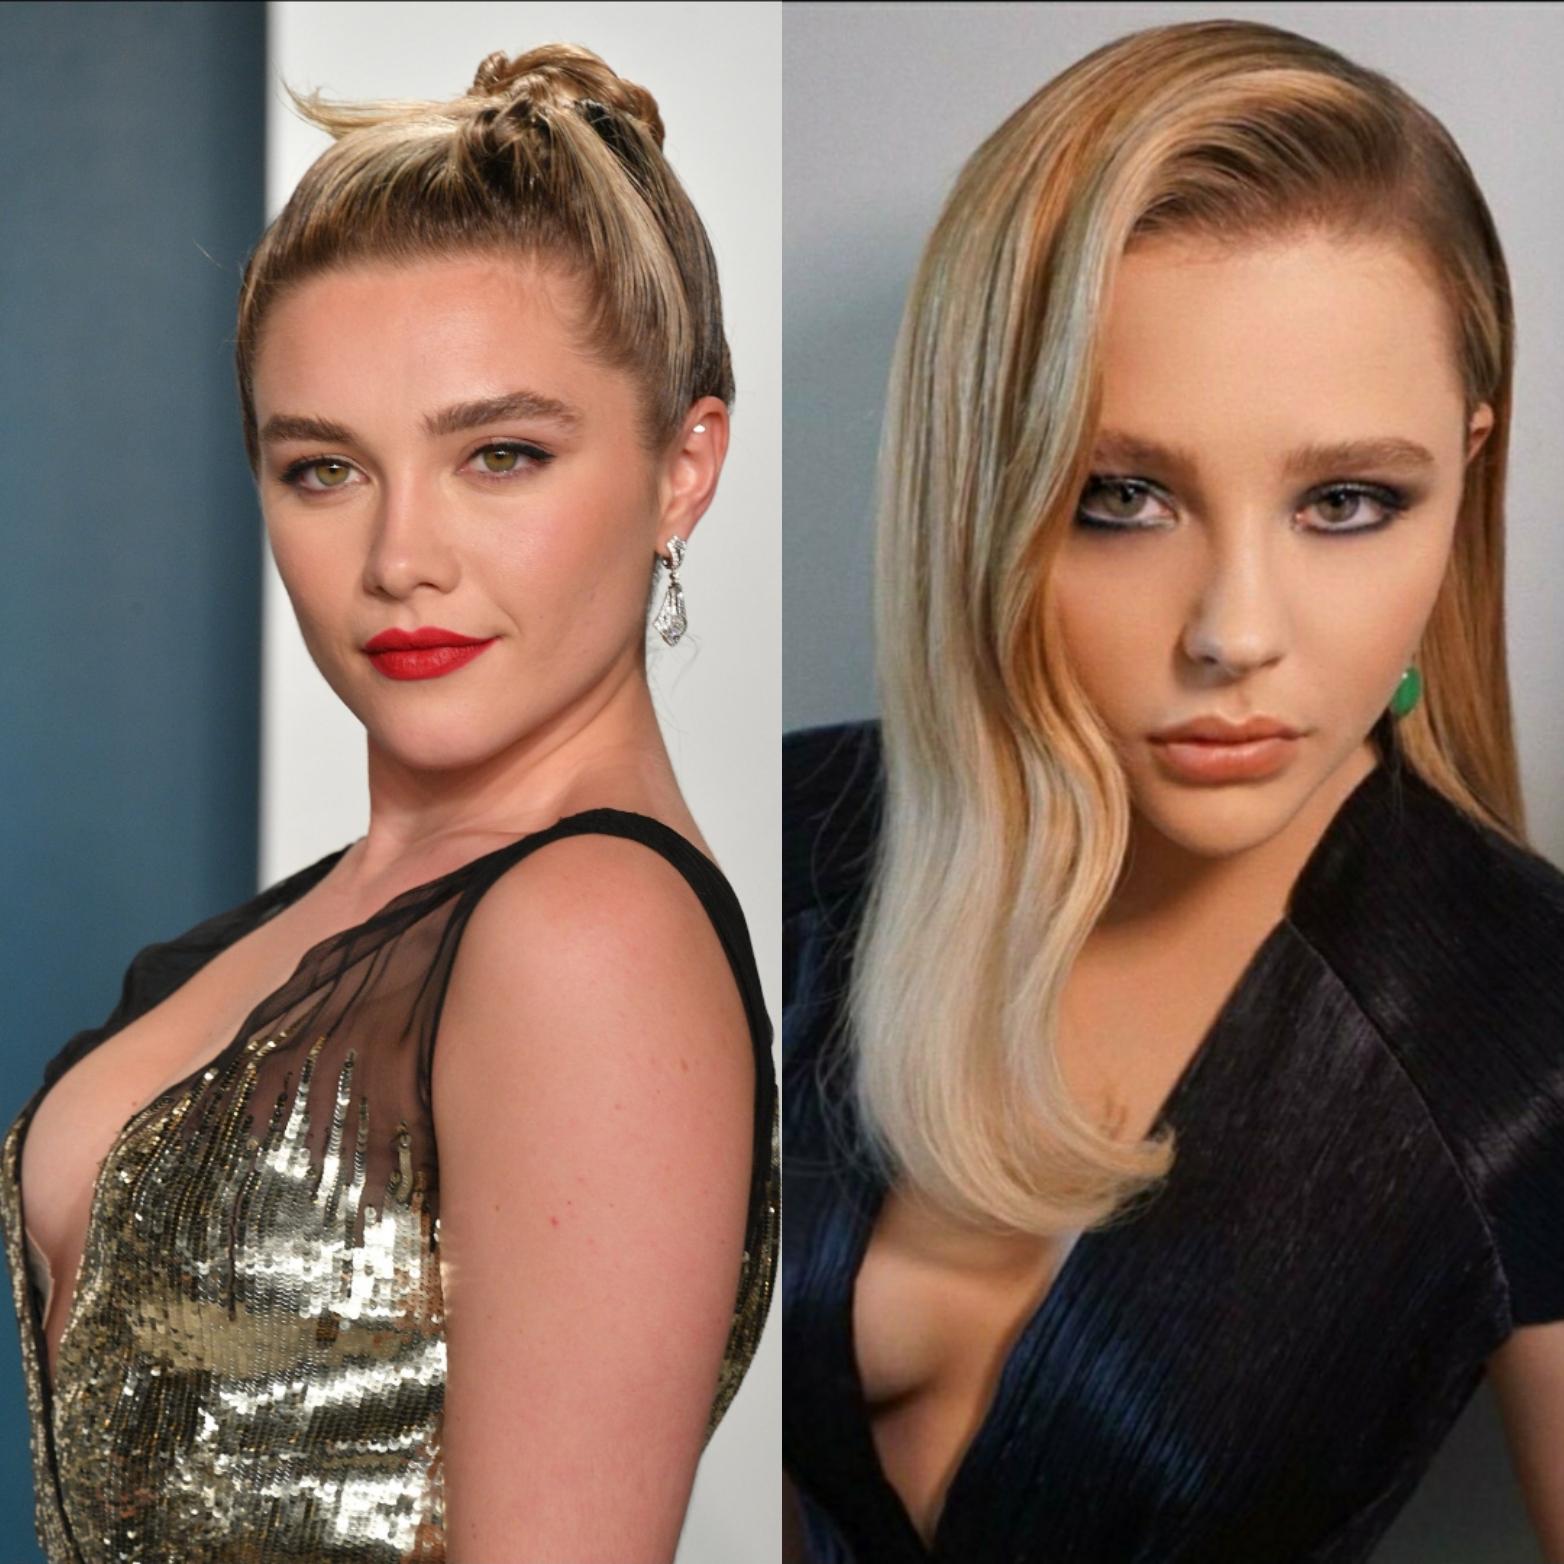 Florence Pugh and Chloe Grace Moretz - They look like sisters that need to be shared